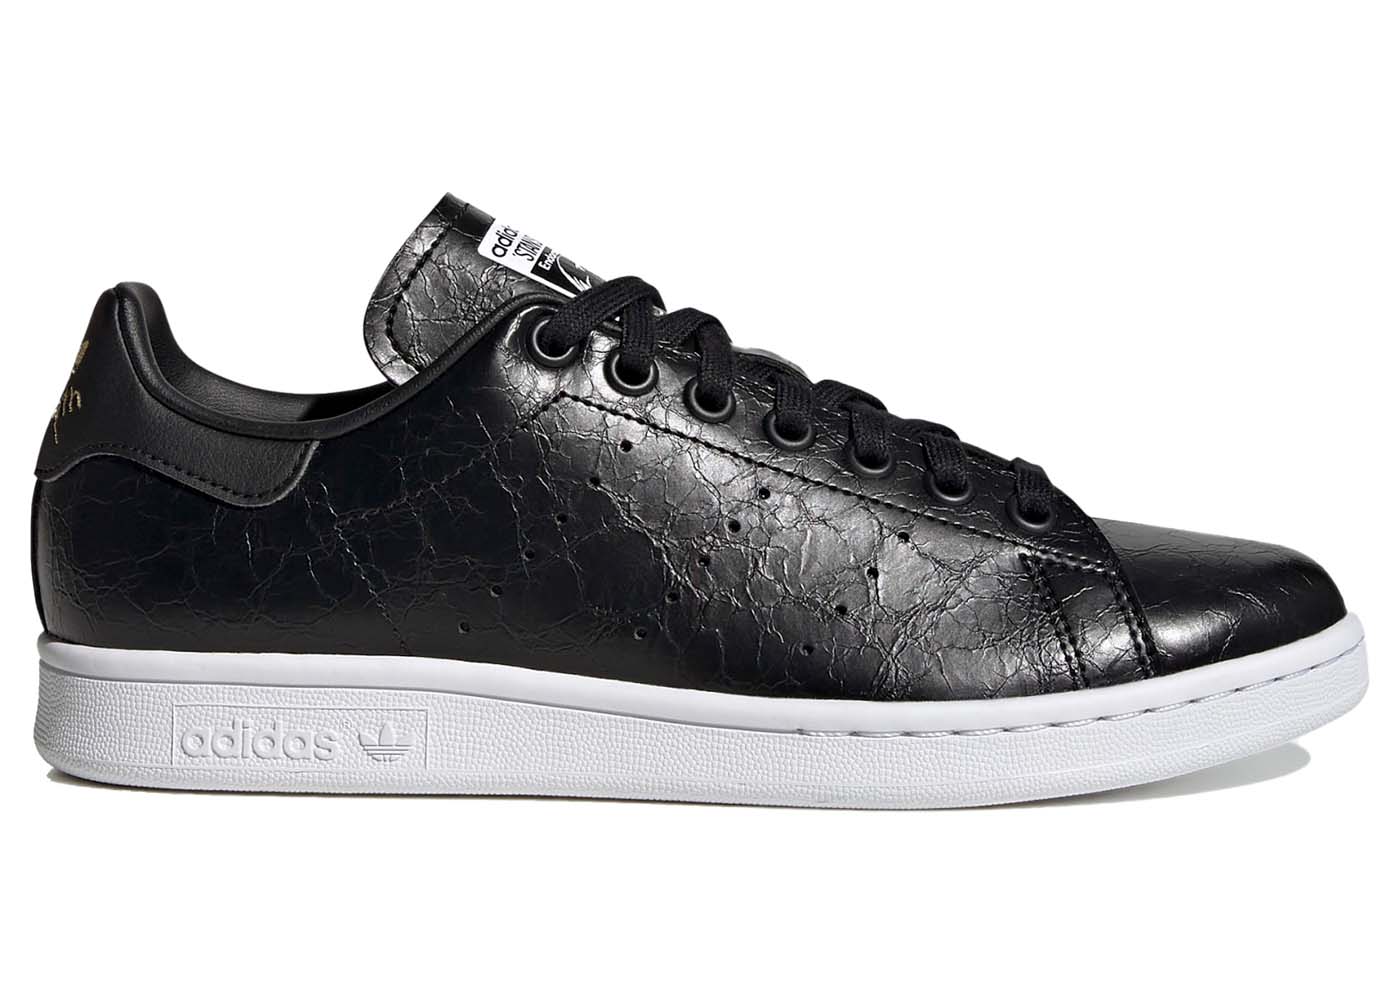 adidas Stan Smith Cracked Leather Black Gold (Women's) - GY5906 - US